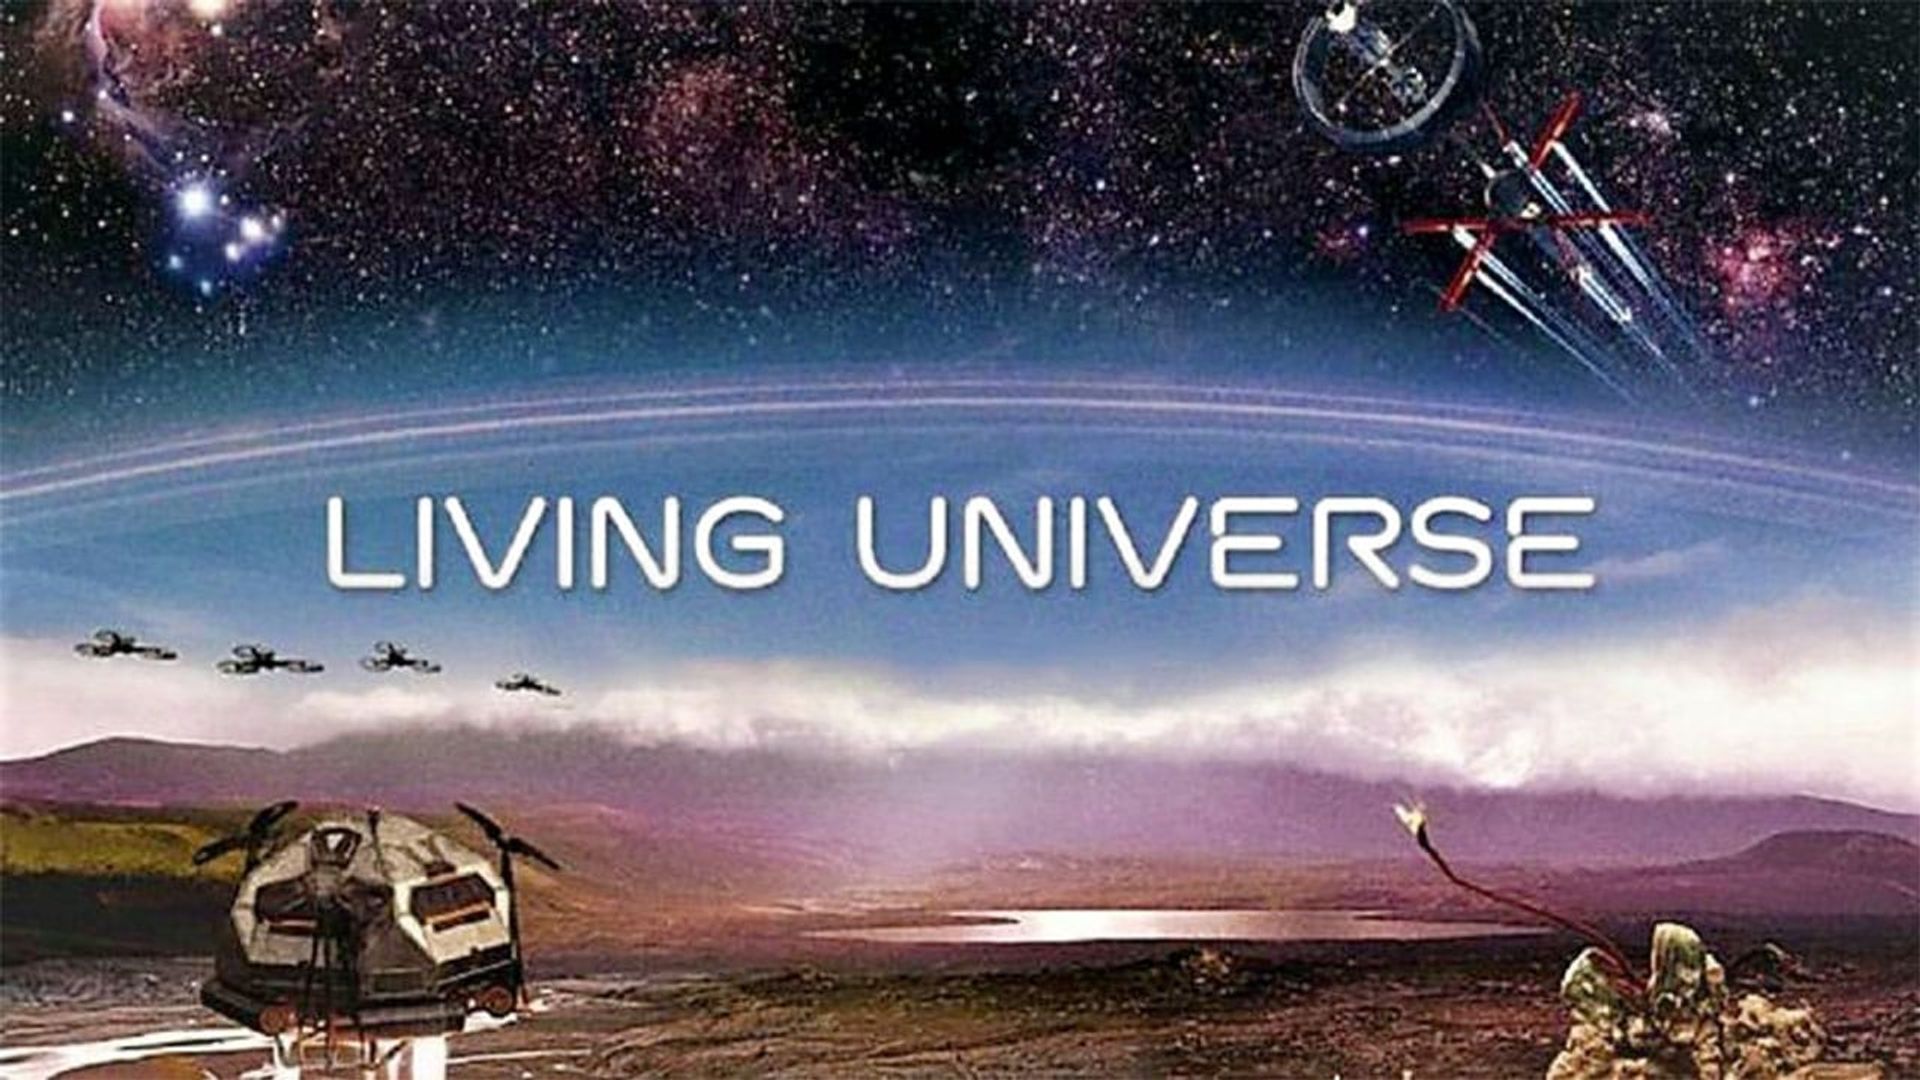 Living Universe background